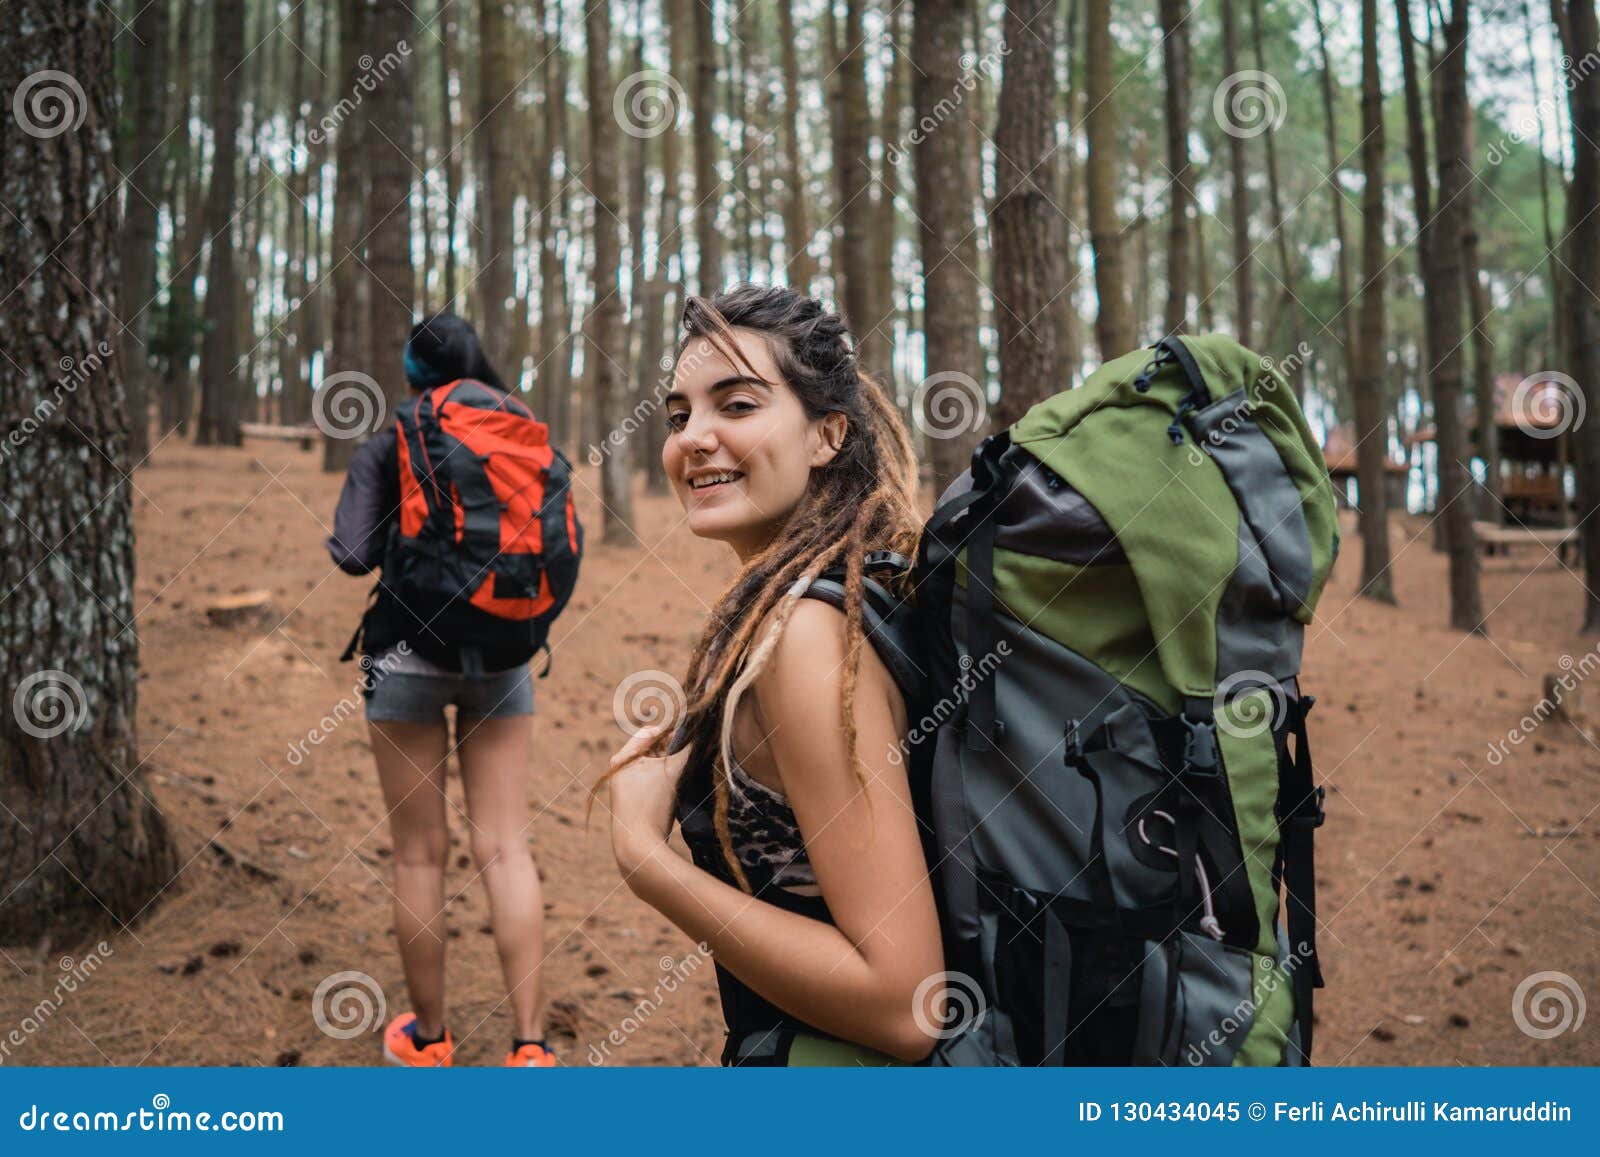 Two Young Female Hiker Walking in Beautiful Nature Stock Image - Image ...